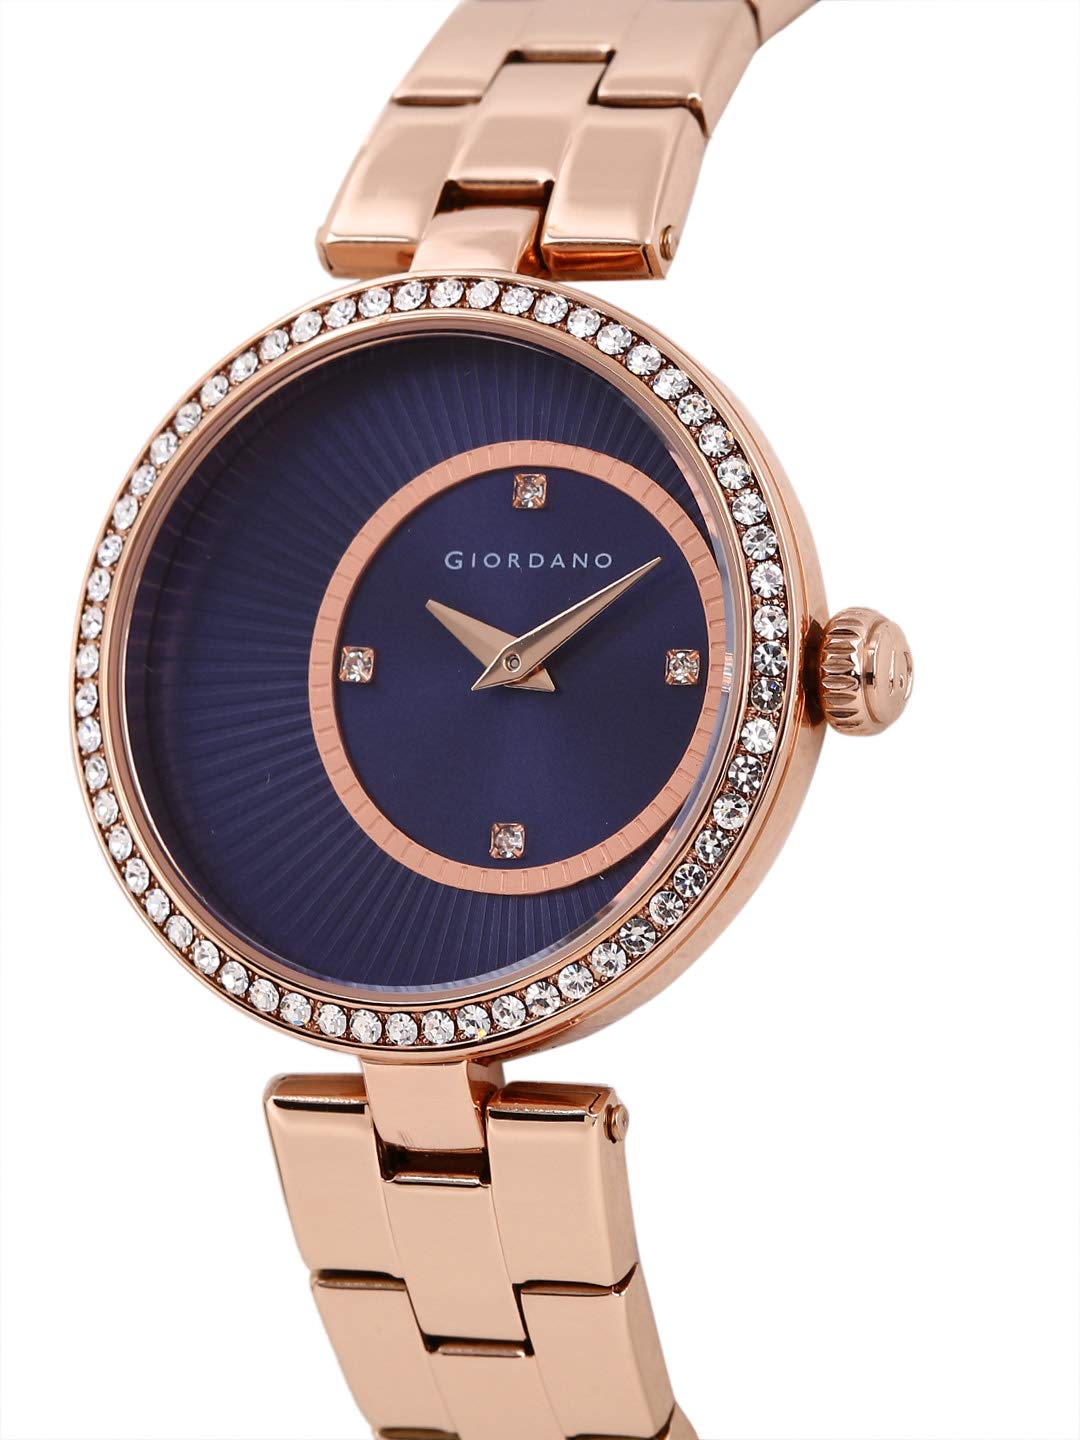 Giordano Analog Stylish Wrist Watch for Women Water Resistant Classy Dial, Stainless Steel Case to Compliment Your Look | Ideal Gift for|Ladies|Girls - A2056